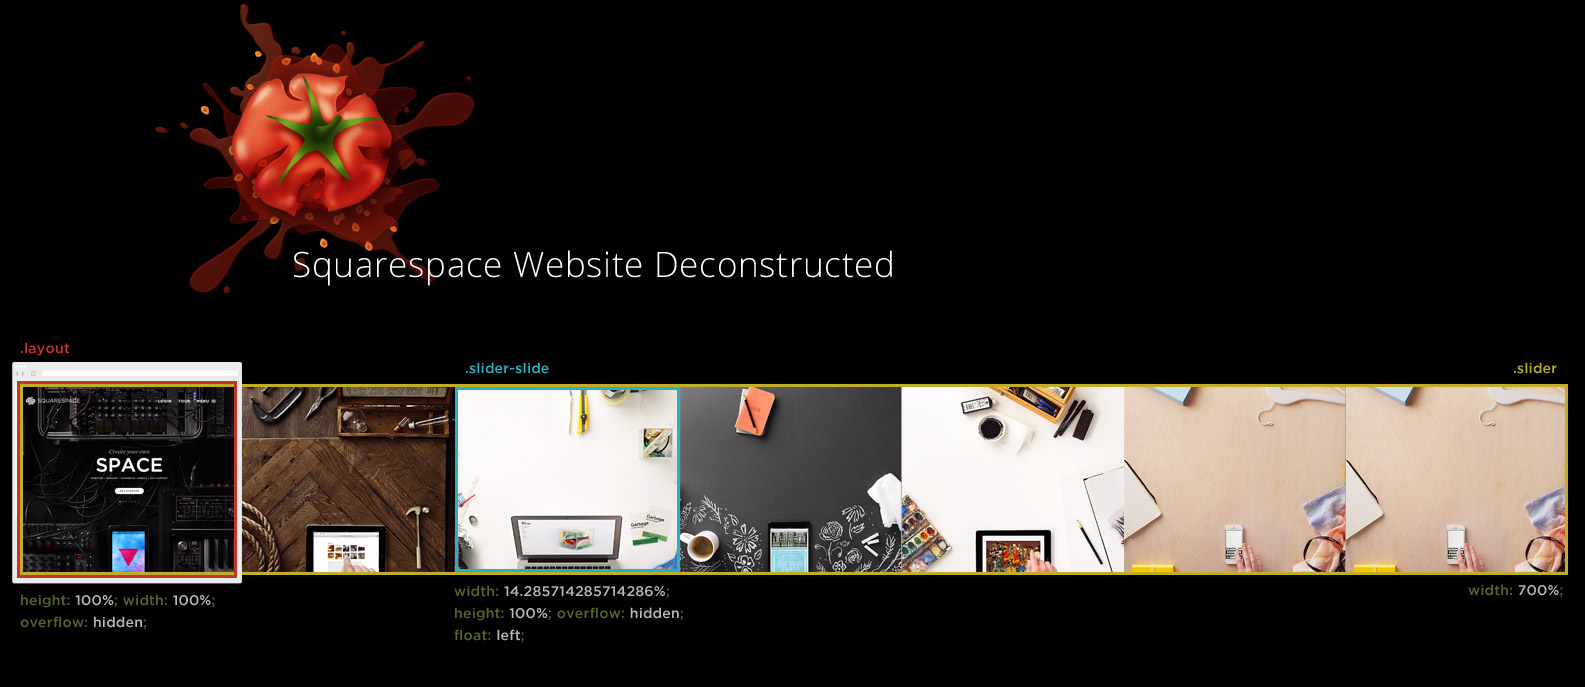 Squarespace.com websited deconstructed